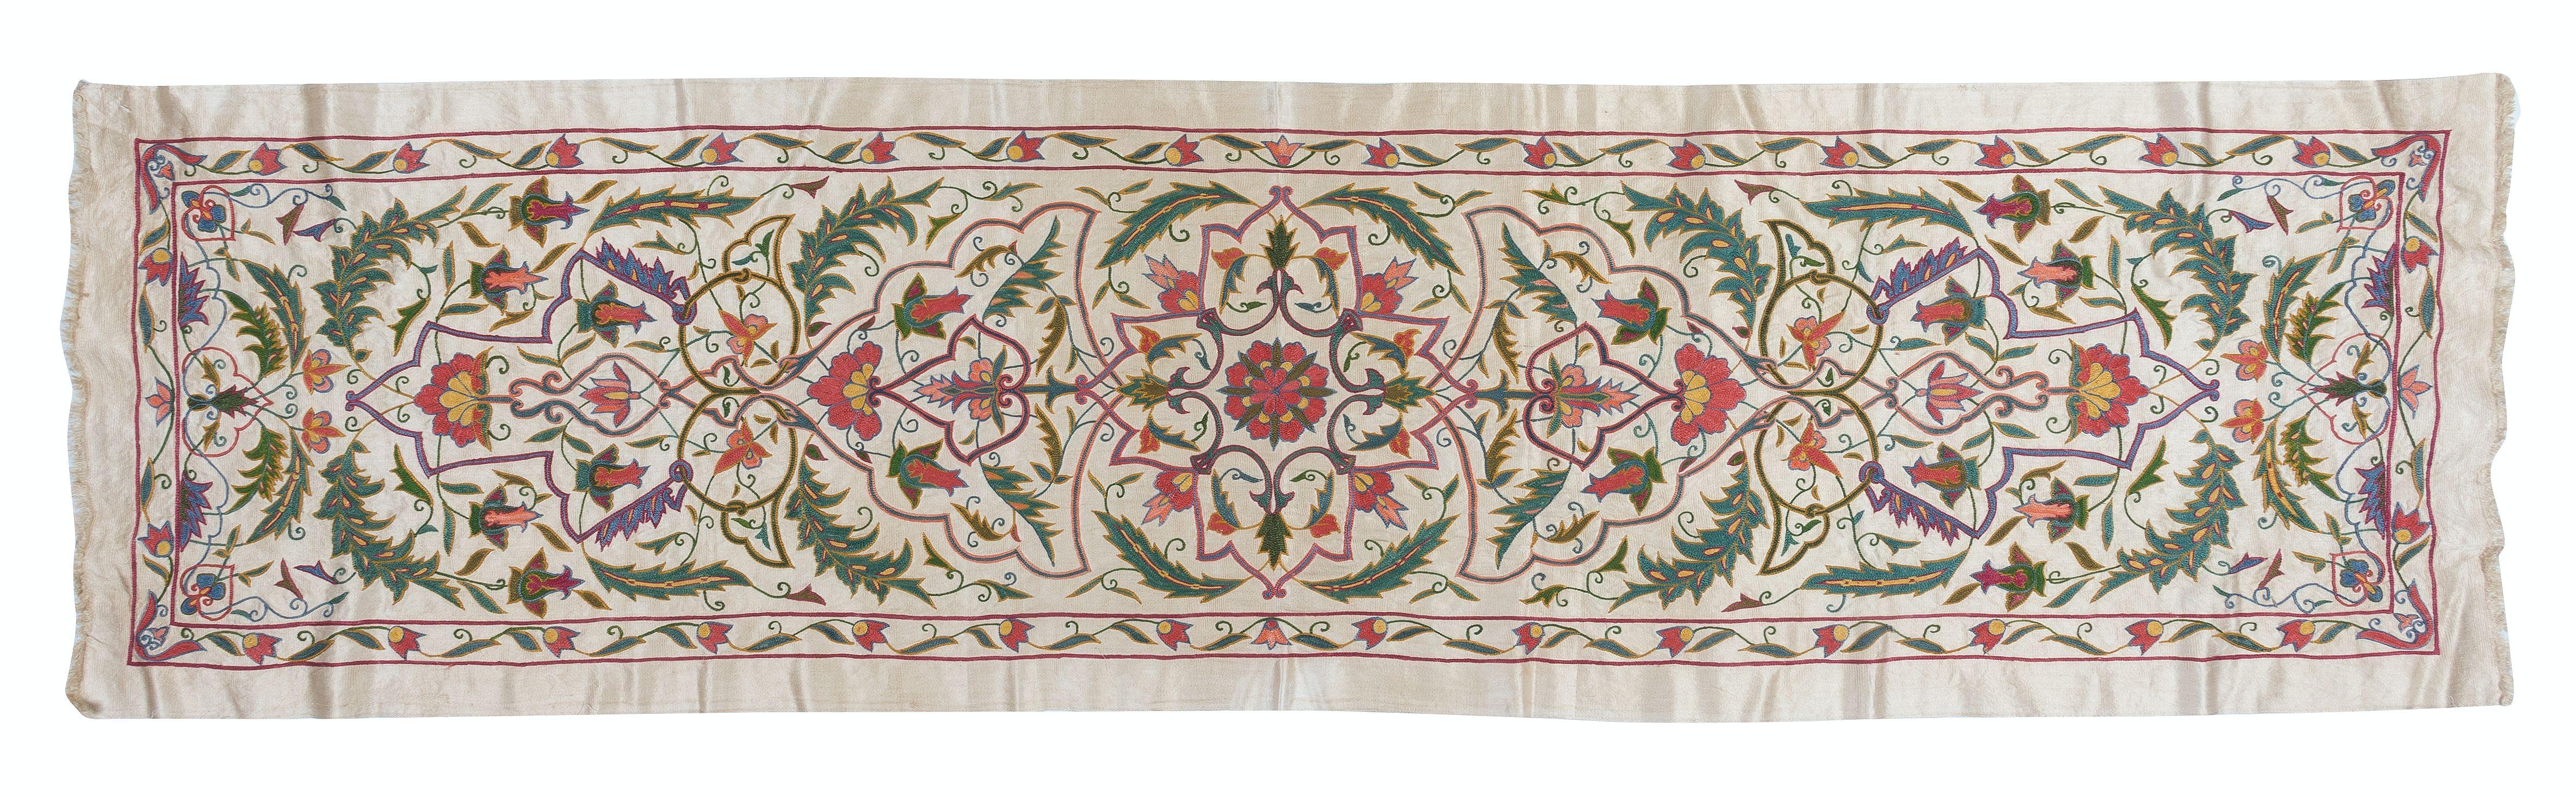 Contemporary 1.7x6.4 ft Embroidered All Silk Runner, Suzani Wall Hanging, Uzbek Bedspread For Sale